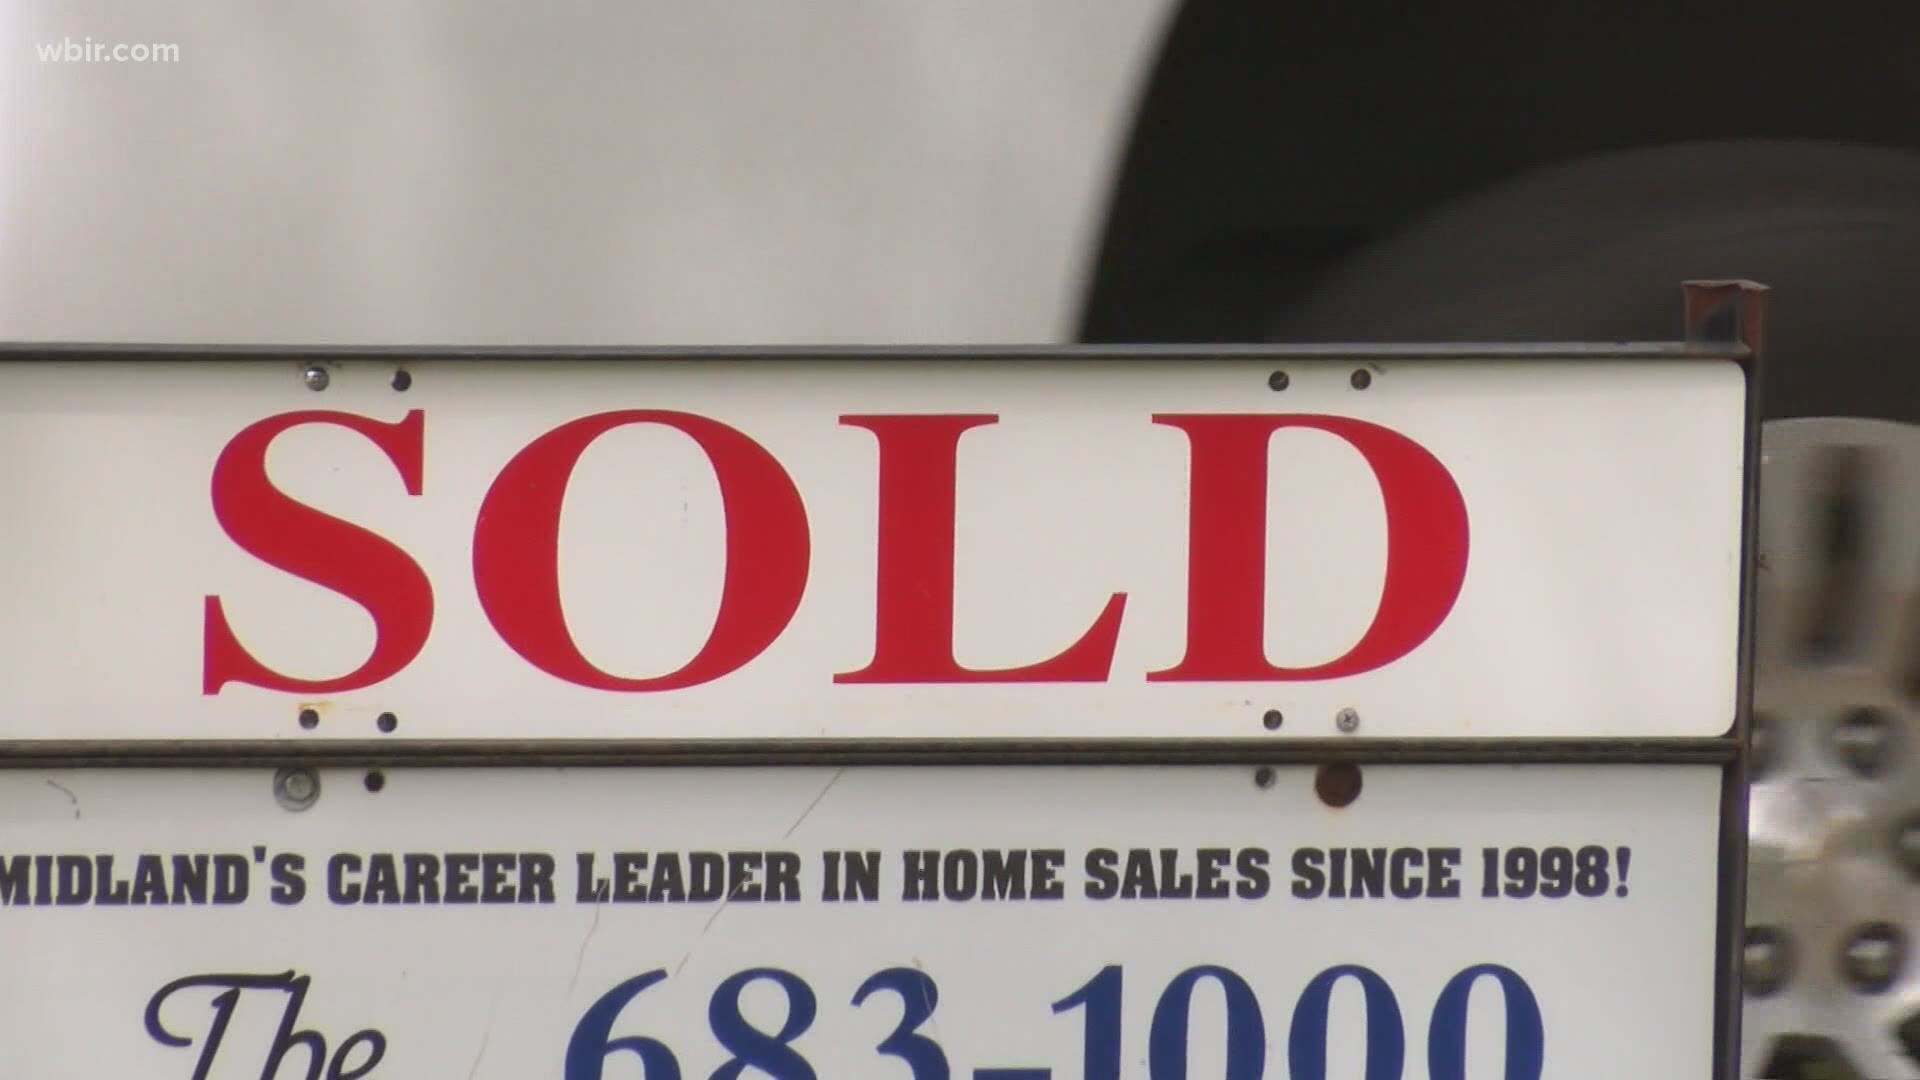 The housing market in Knoxville has gotten very competitive. The demand is much higher than the number of homes for sale.